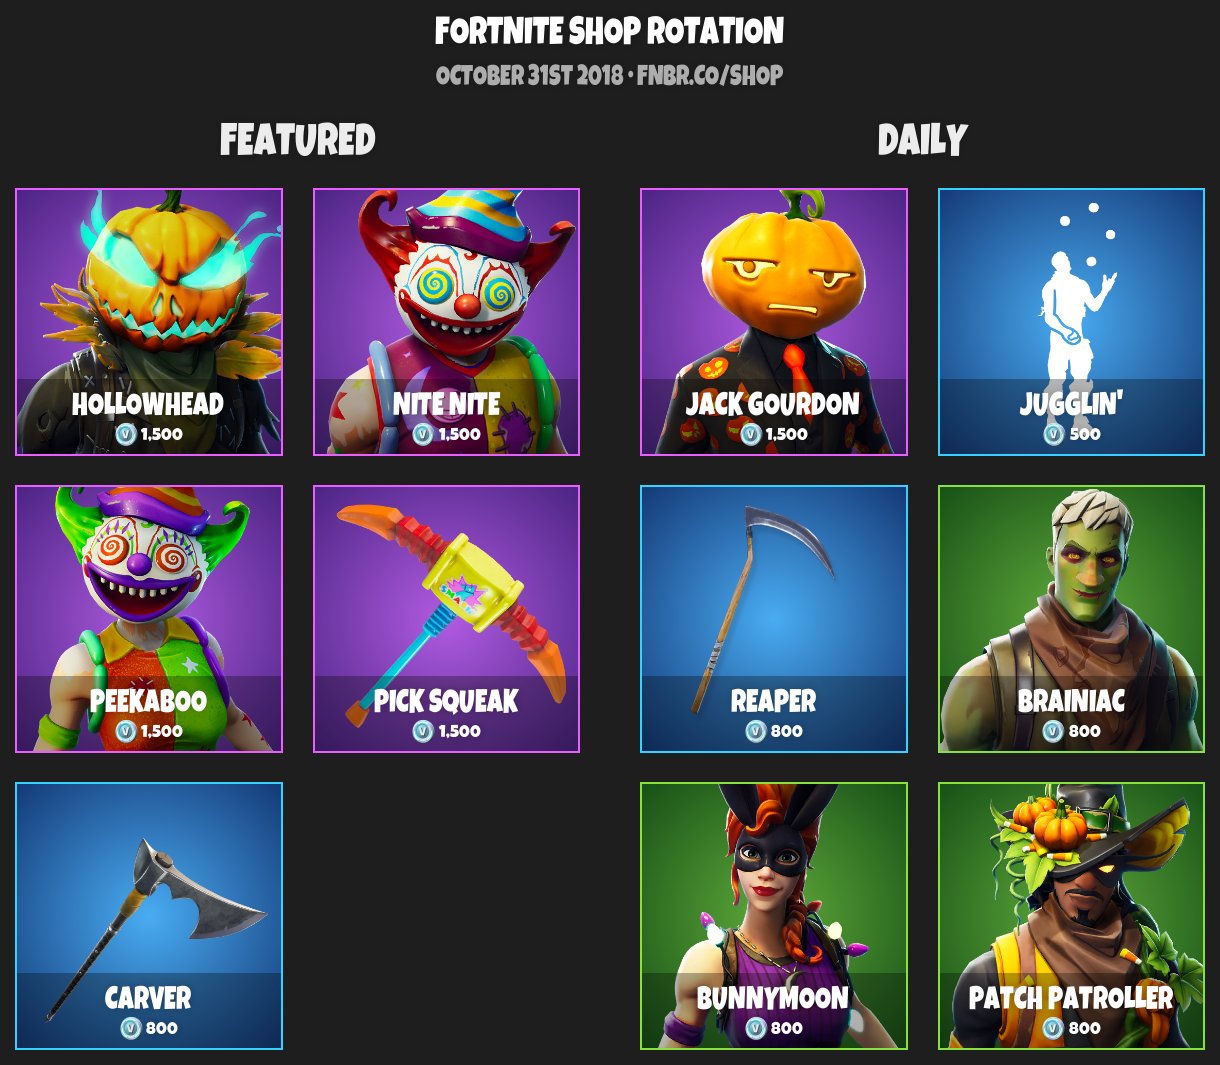 Fnbr Co On Twitter Fortnite Item Shop For October 31st 2018 Https T Co Nxpckxmqqb